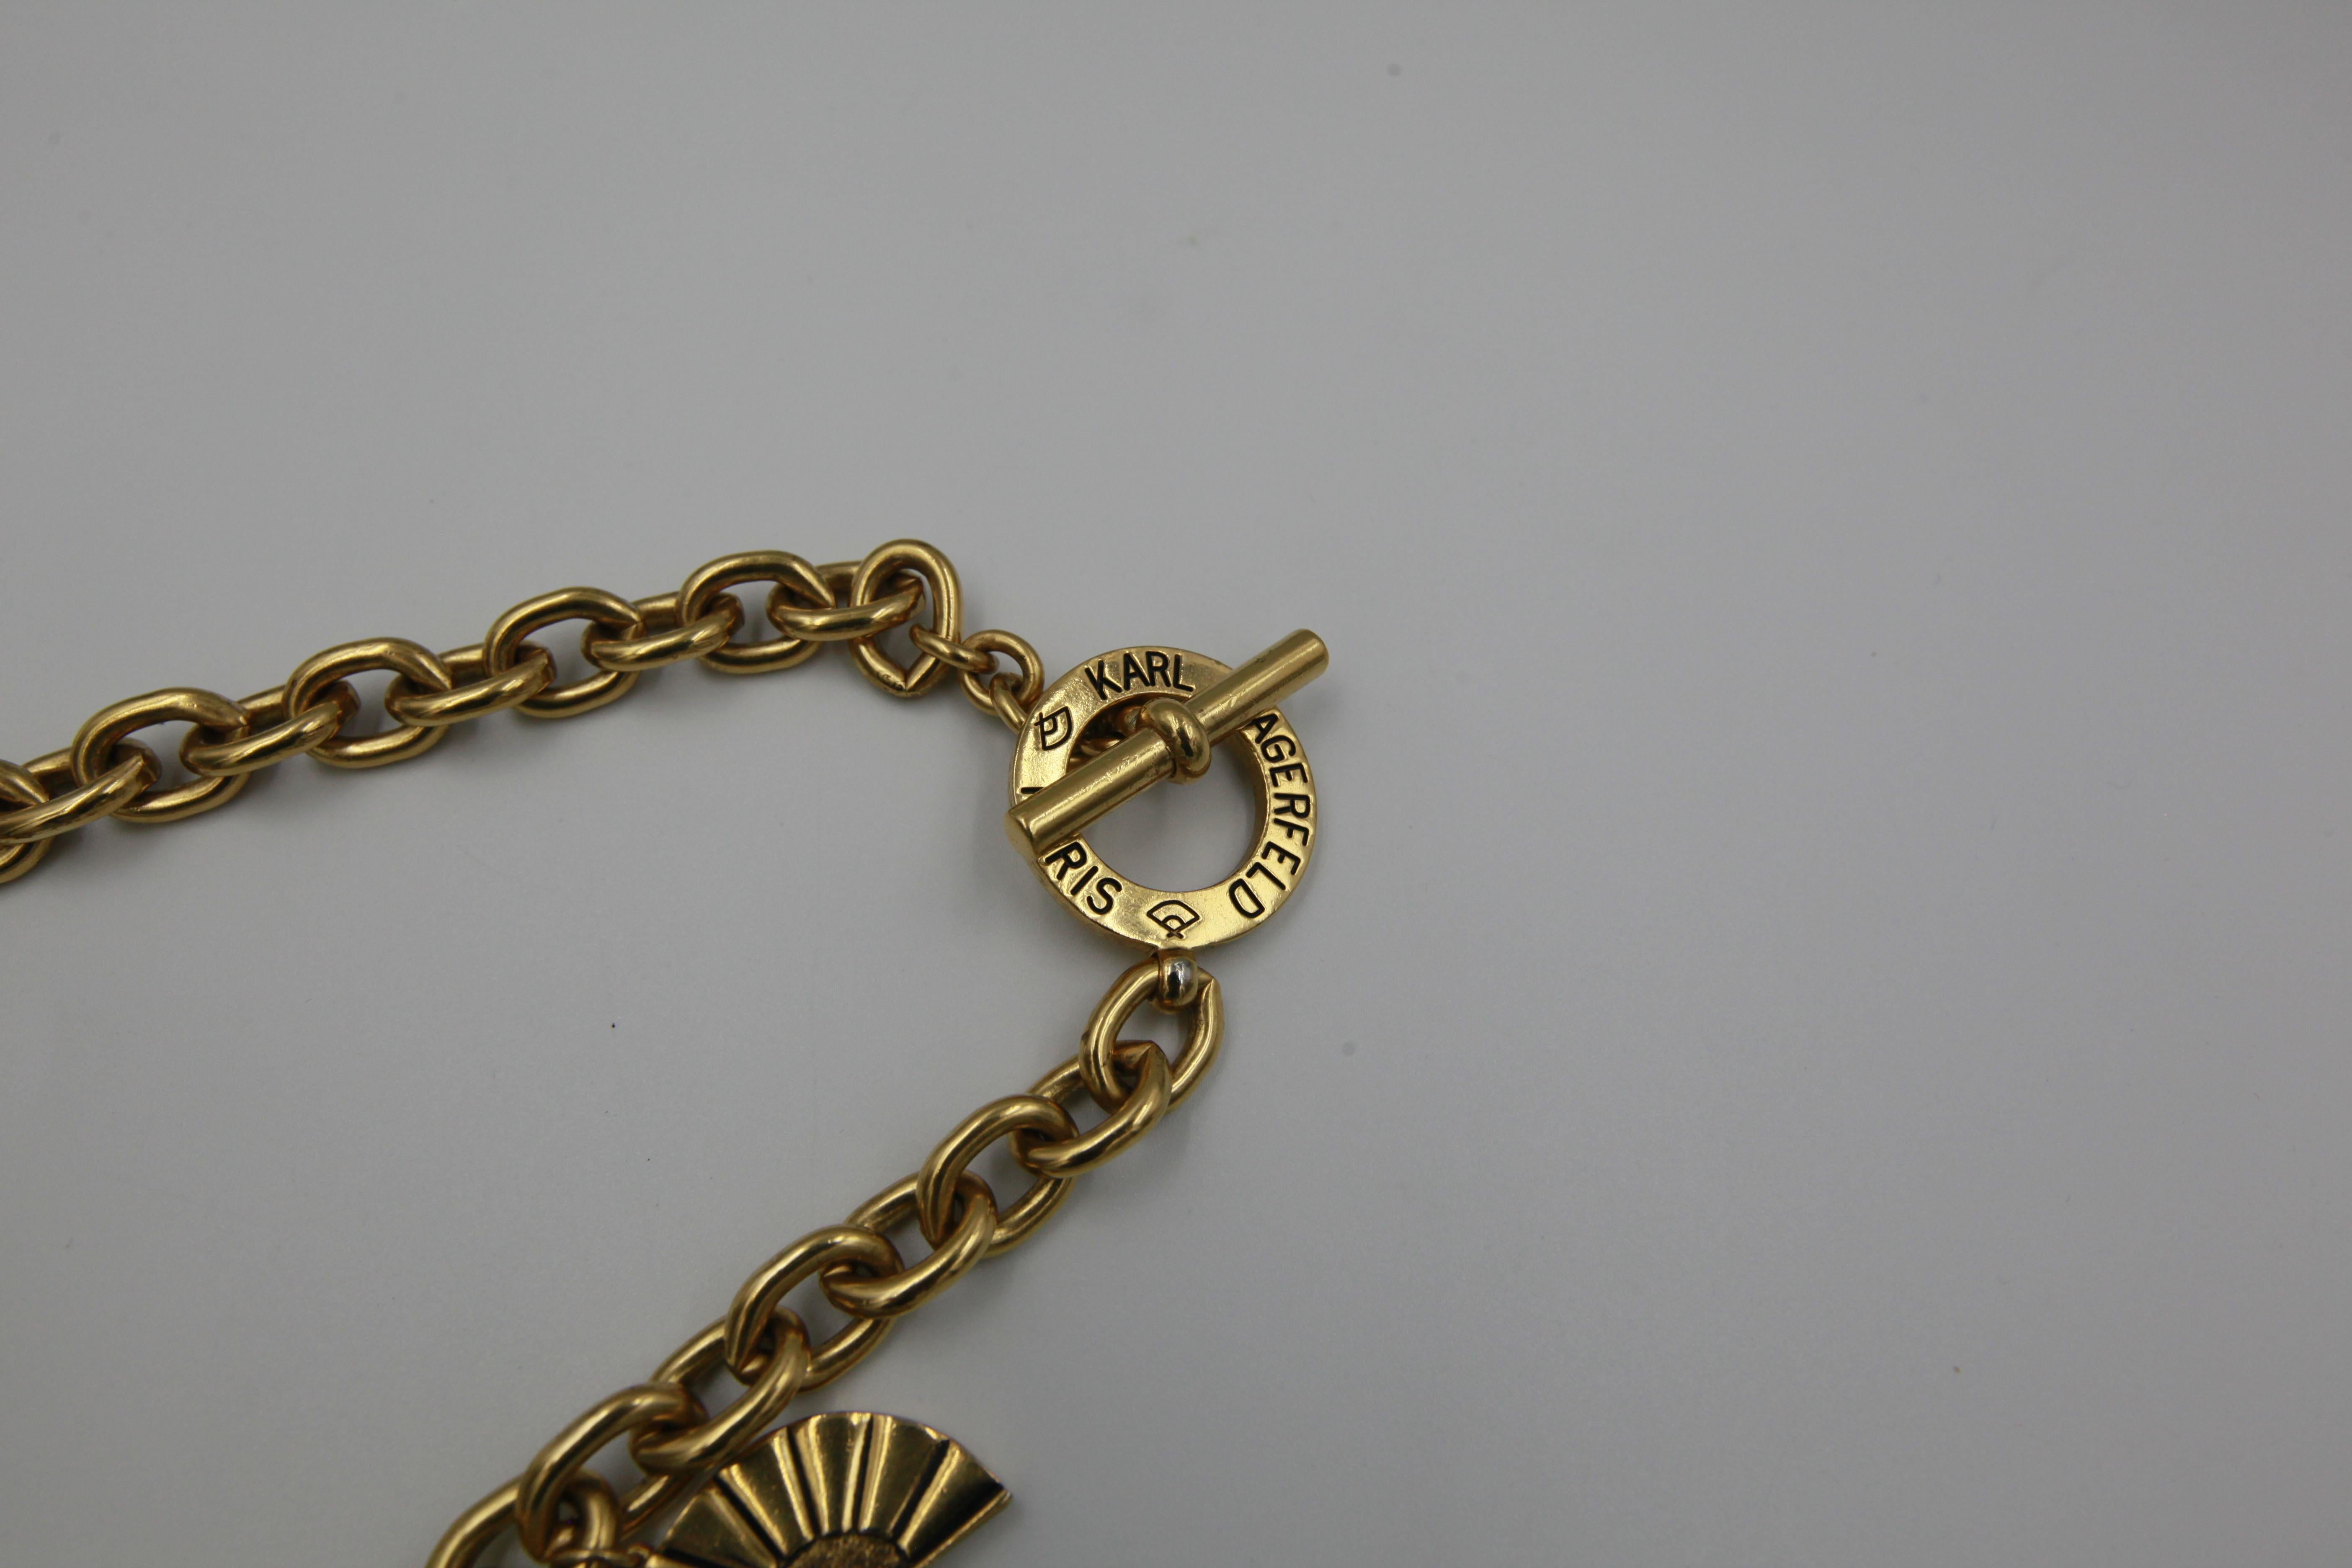 Vintage signature chain statement Karl Lagerfeld necklace in gold-tone metal featuring fan and Logo rings charms.
Signed. 
Period: 1990s
Chain length: 47 cm
Condition: Very Good. Minor scratches throughout metal.


........Additional information